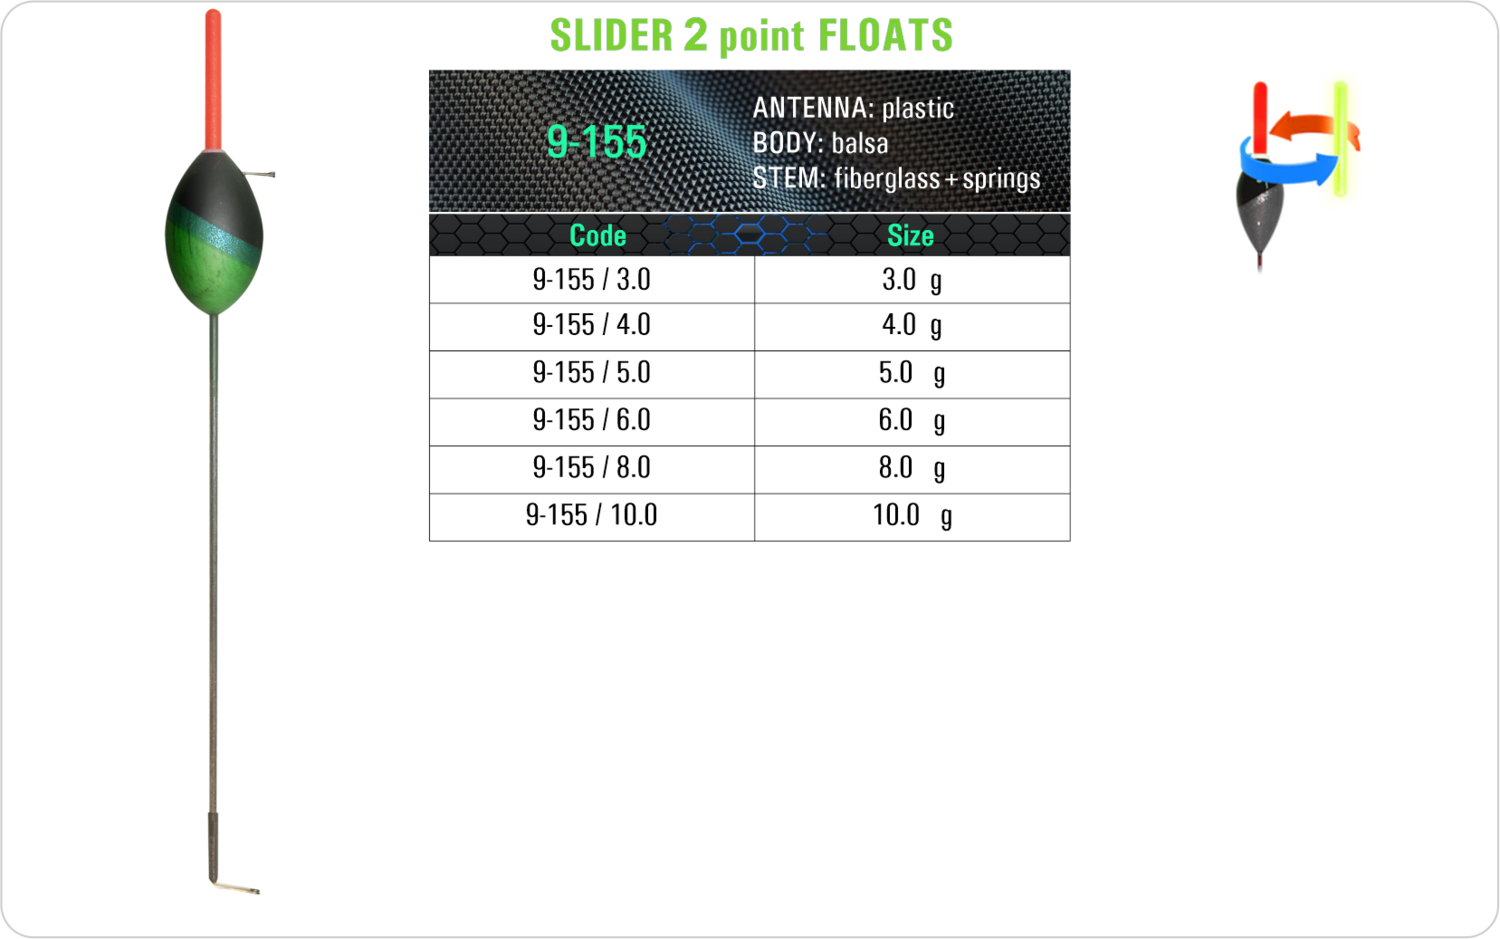 SF 9-155 - Lake and river float model and table containing an additional information about this float with different codes, sizes, types of the body, the stem and the antenna of the float.